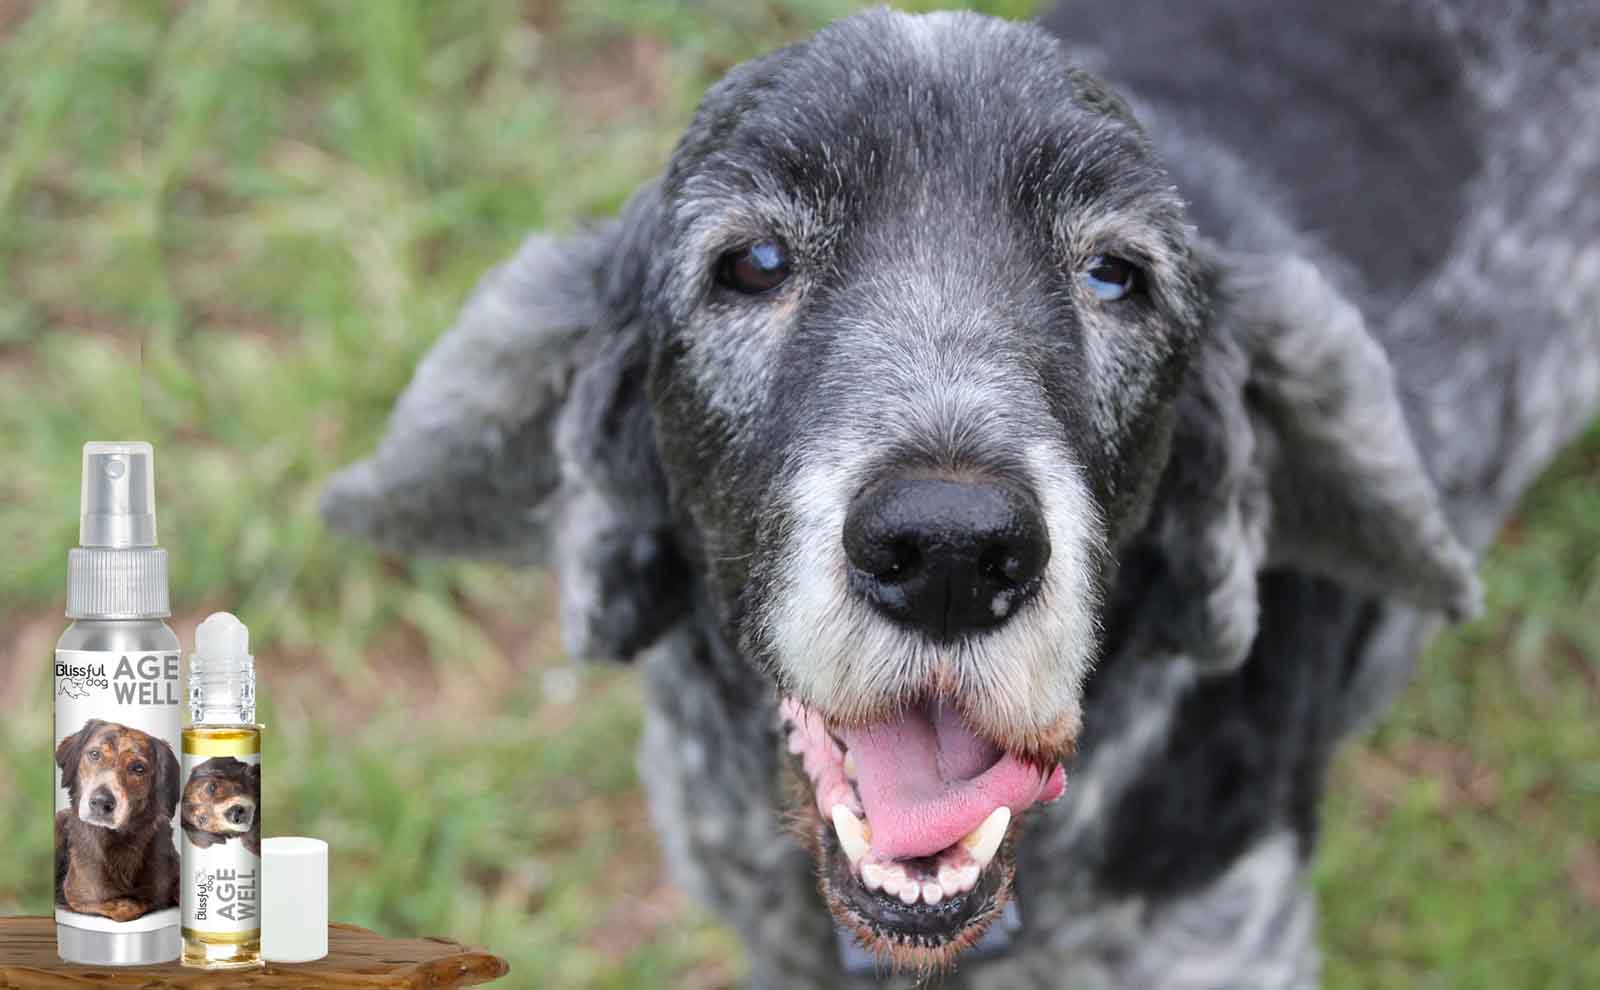 my dog getting old